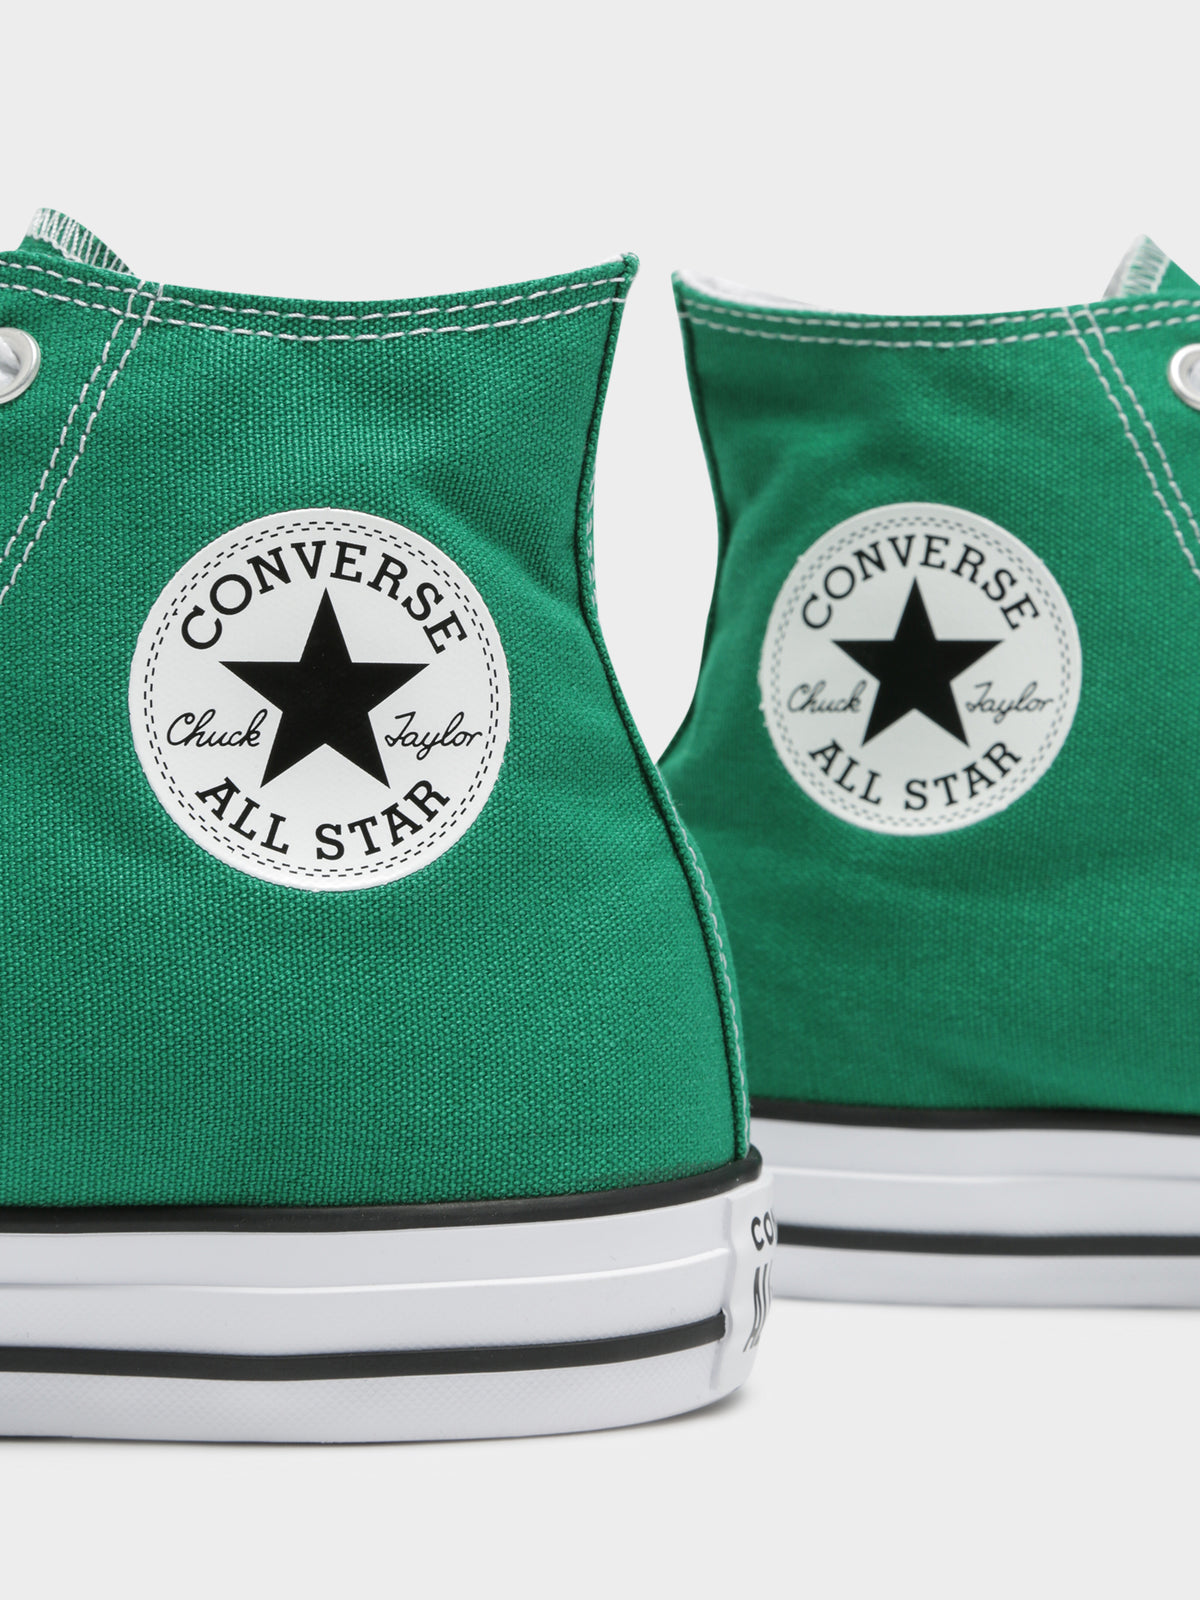 Unisex Chuck Taylor All Star High Sneakers in Amazon Green